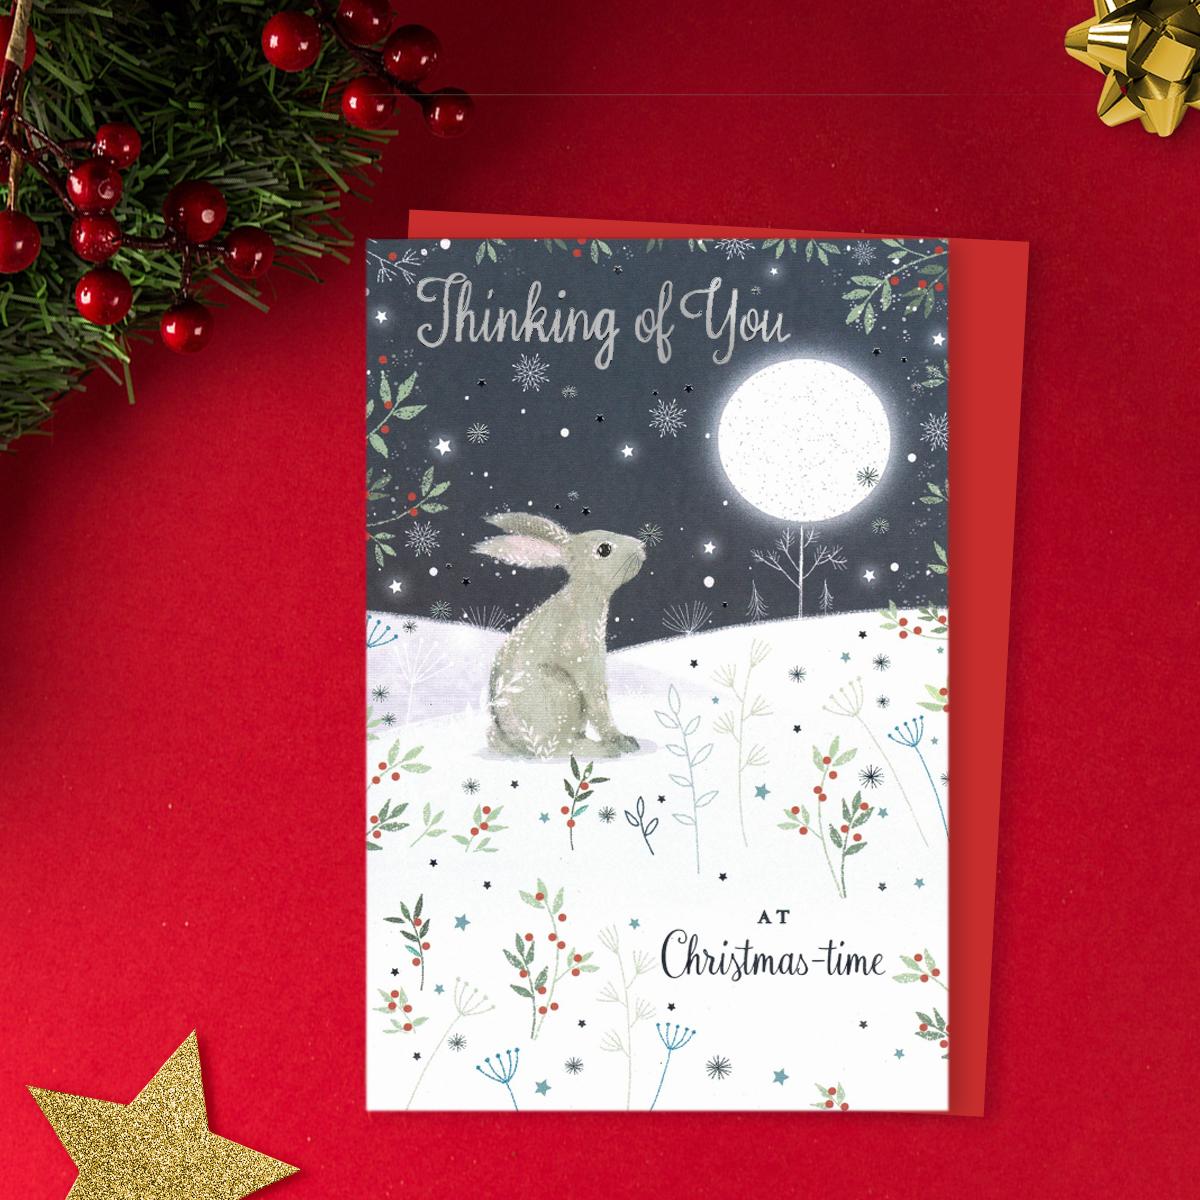 Thinking Of You At Christmas Time Featuring A Rabbit Looking At the Full Moon. Finished With Sparkle, Silver Foil Details And Red Envelope